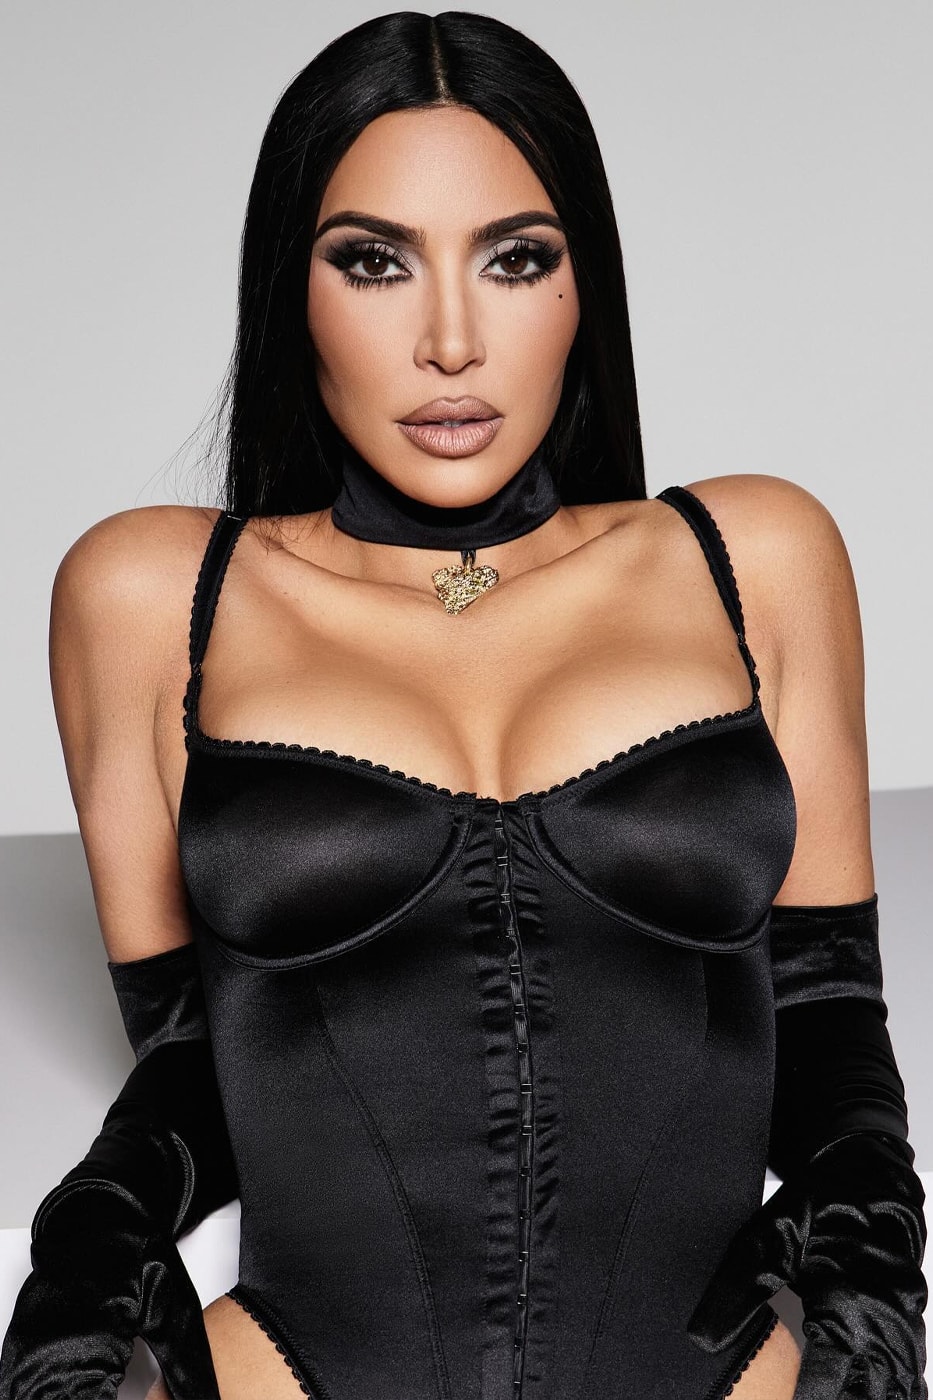 Kim Kardashian - What you've been waiting for: the @SKIMS pieces that  revolutionized the shapewear industry are back and now available to shop in  sizes XXS - 5X and in 9 tonal